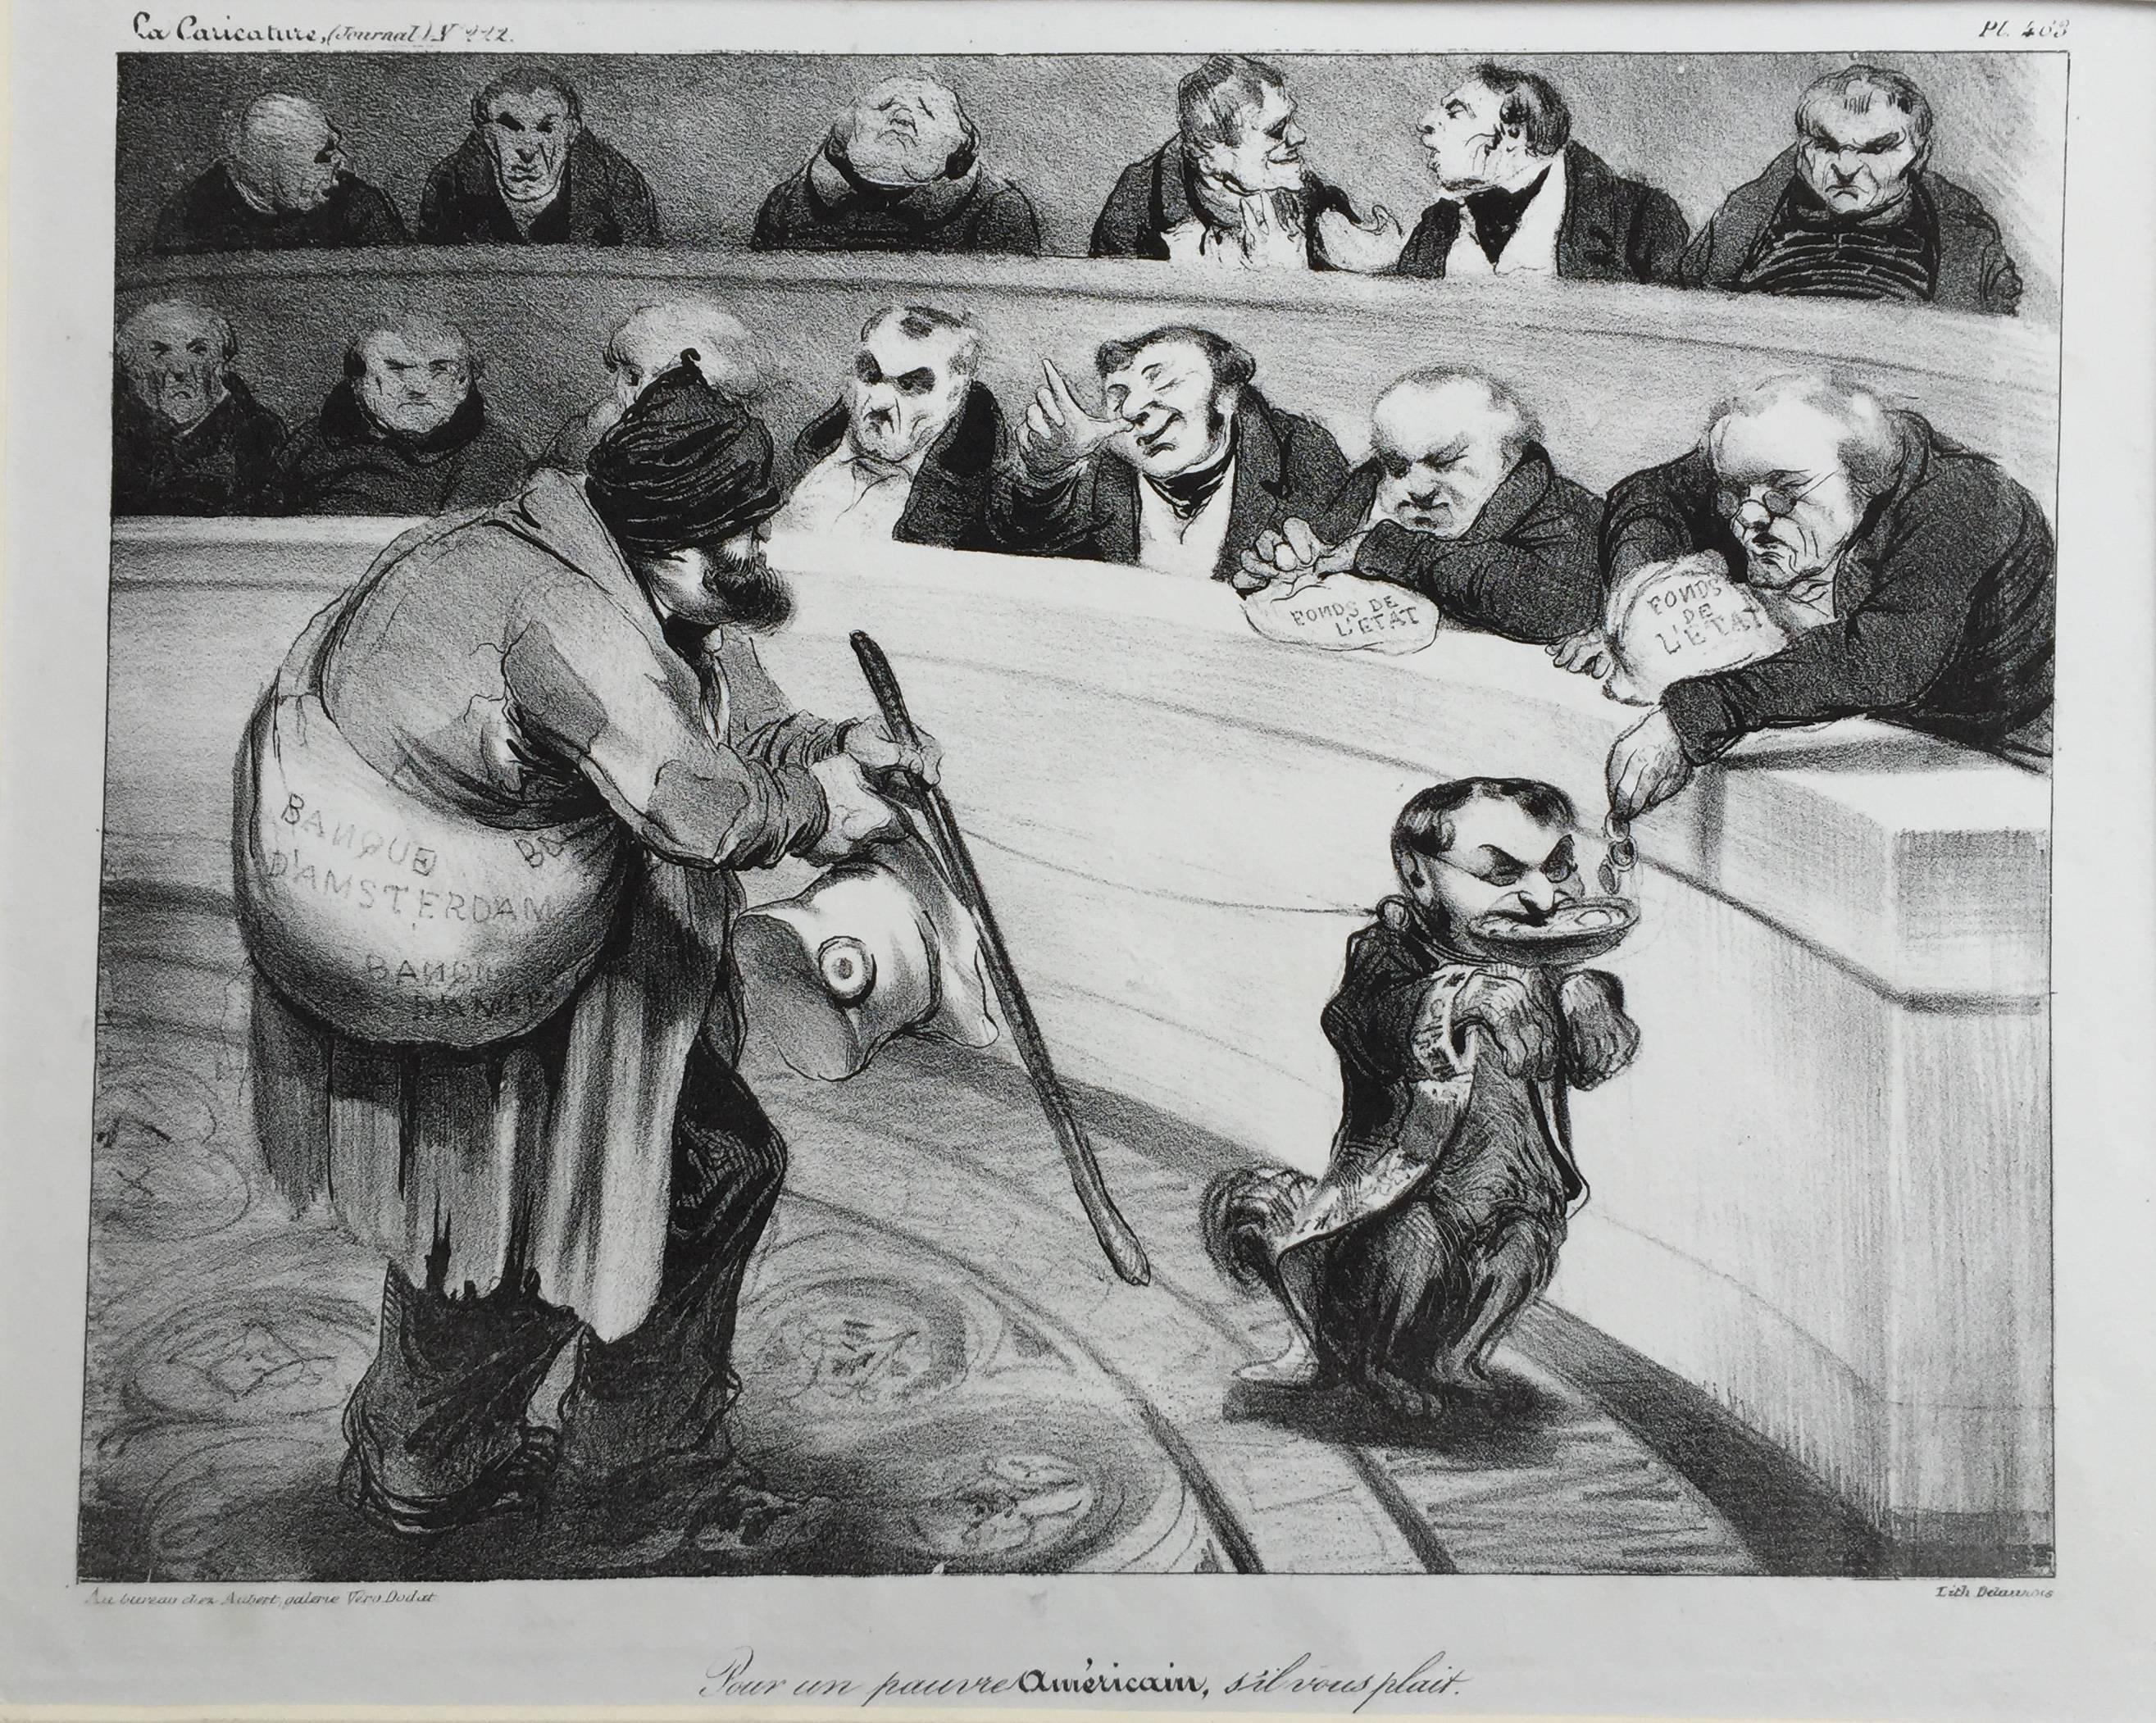 Honoré Daumier Figurative Print - FOR A POOR AMERICAN, PLEASE